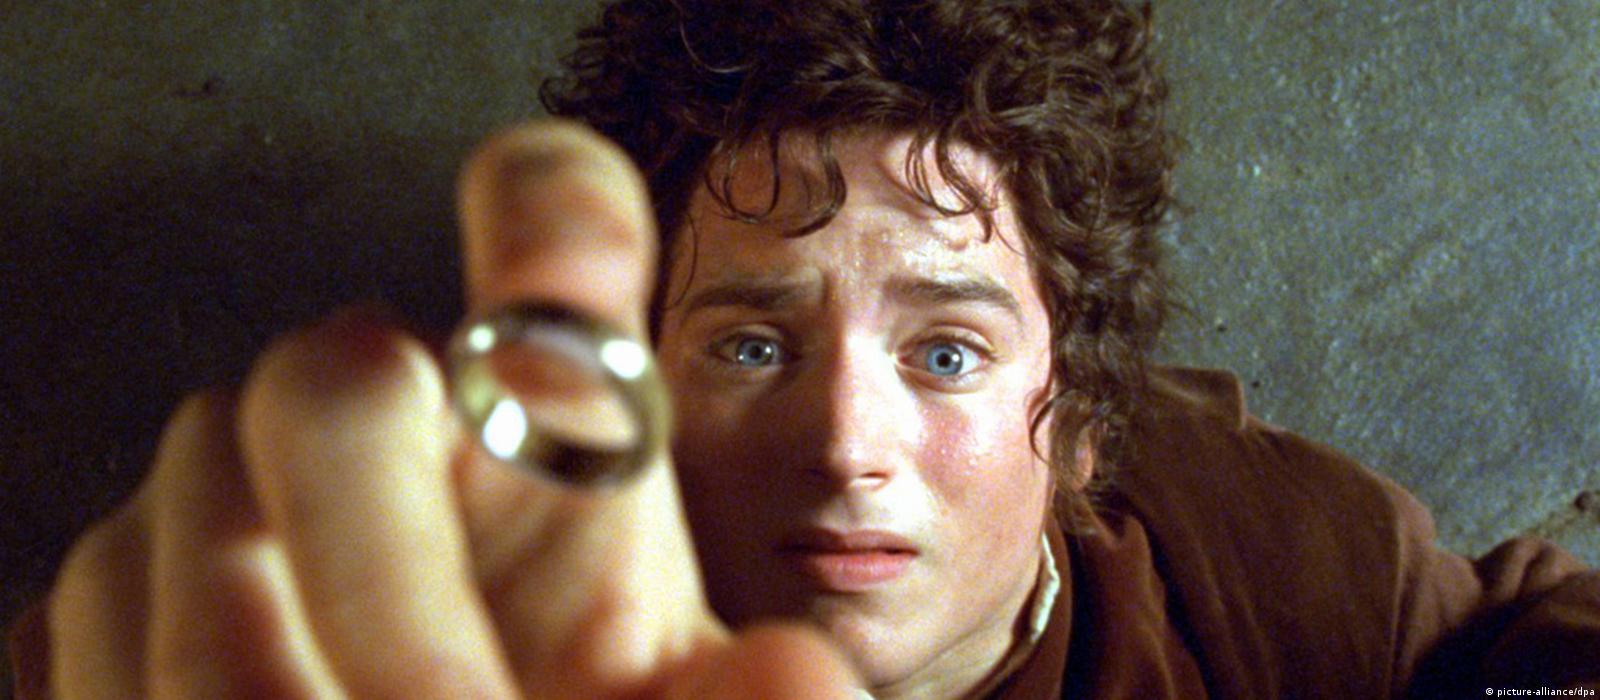 Op-ed: Why The Lord of the Rings movies matter 20 years later - Little  Village